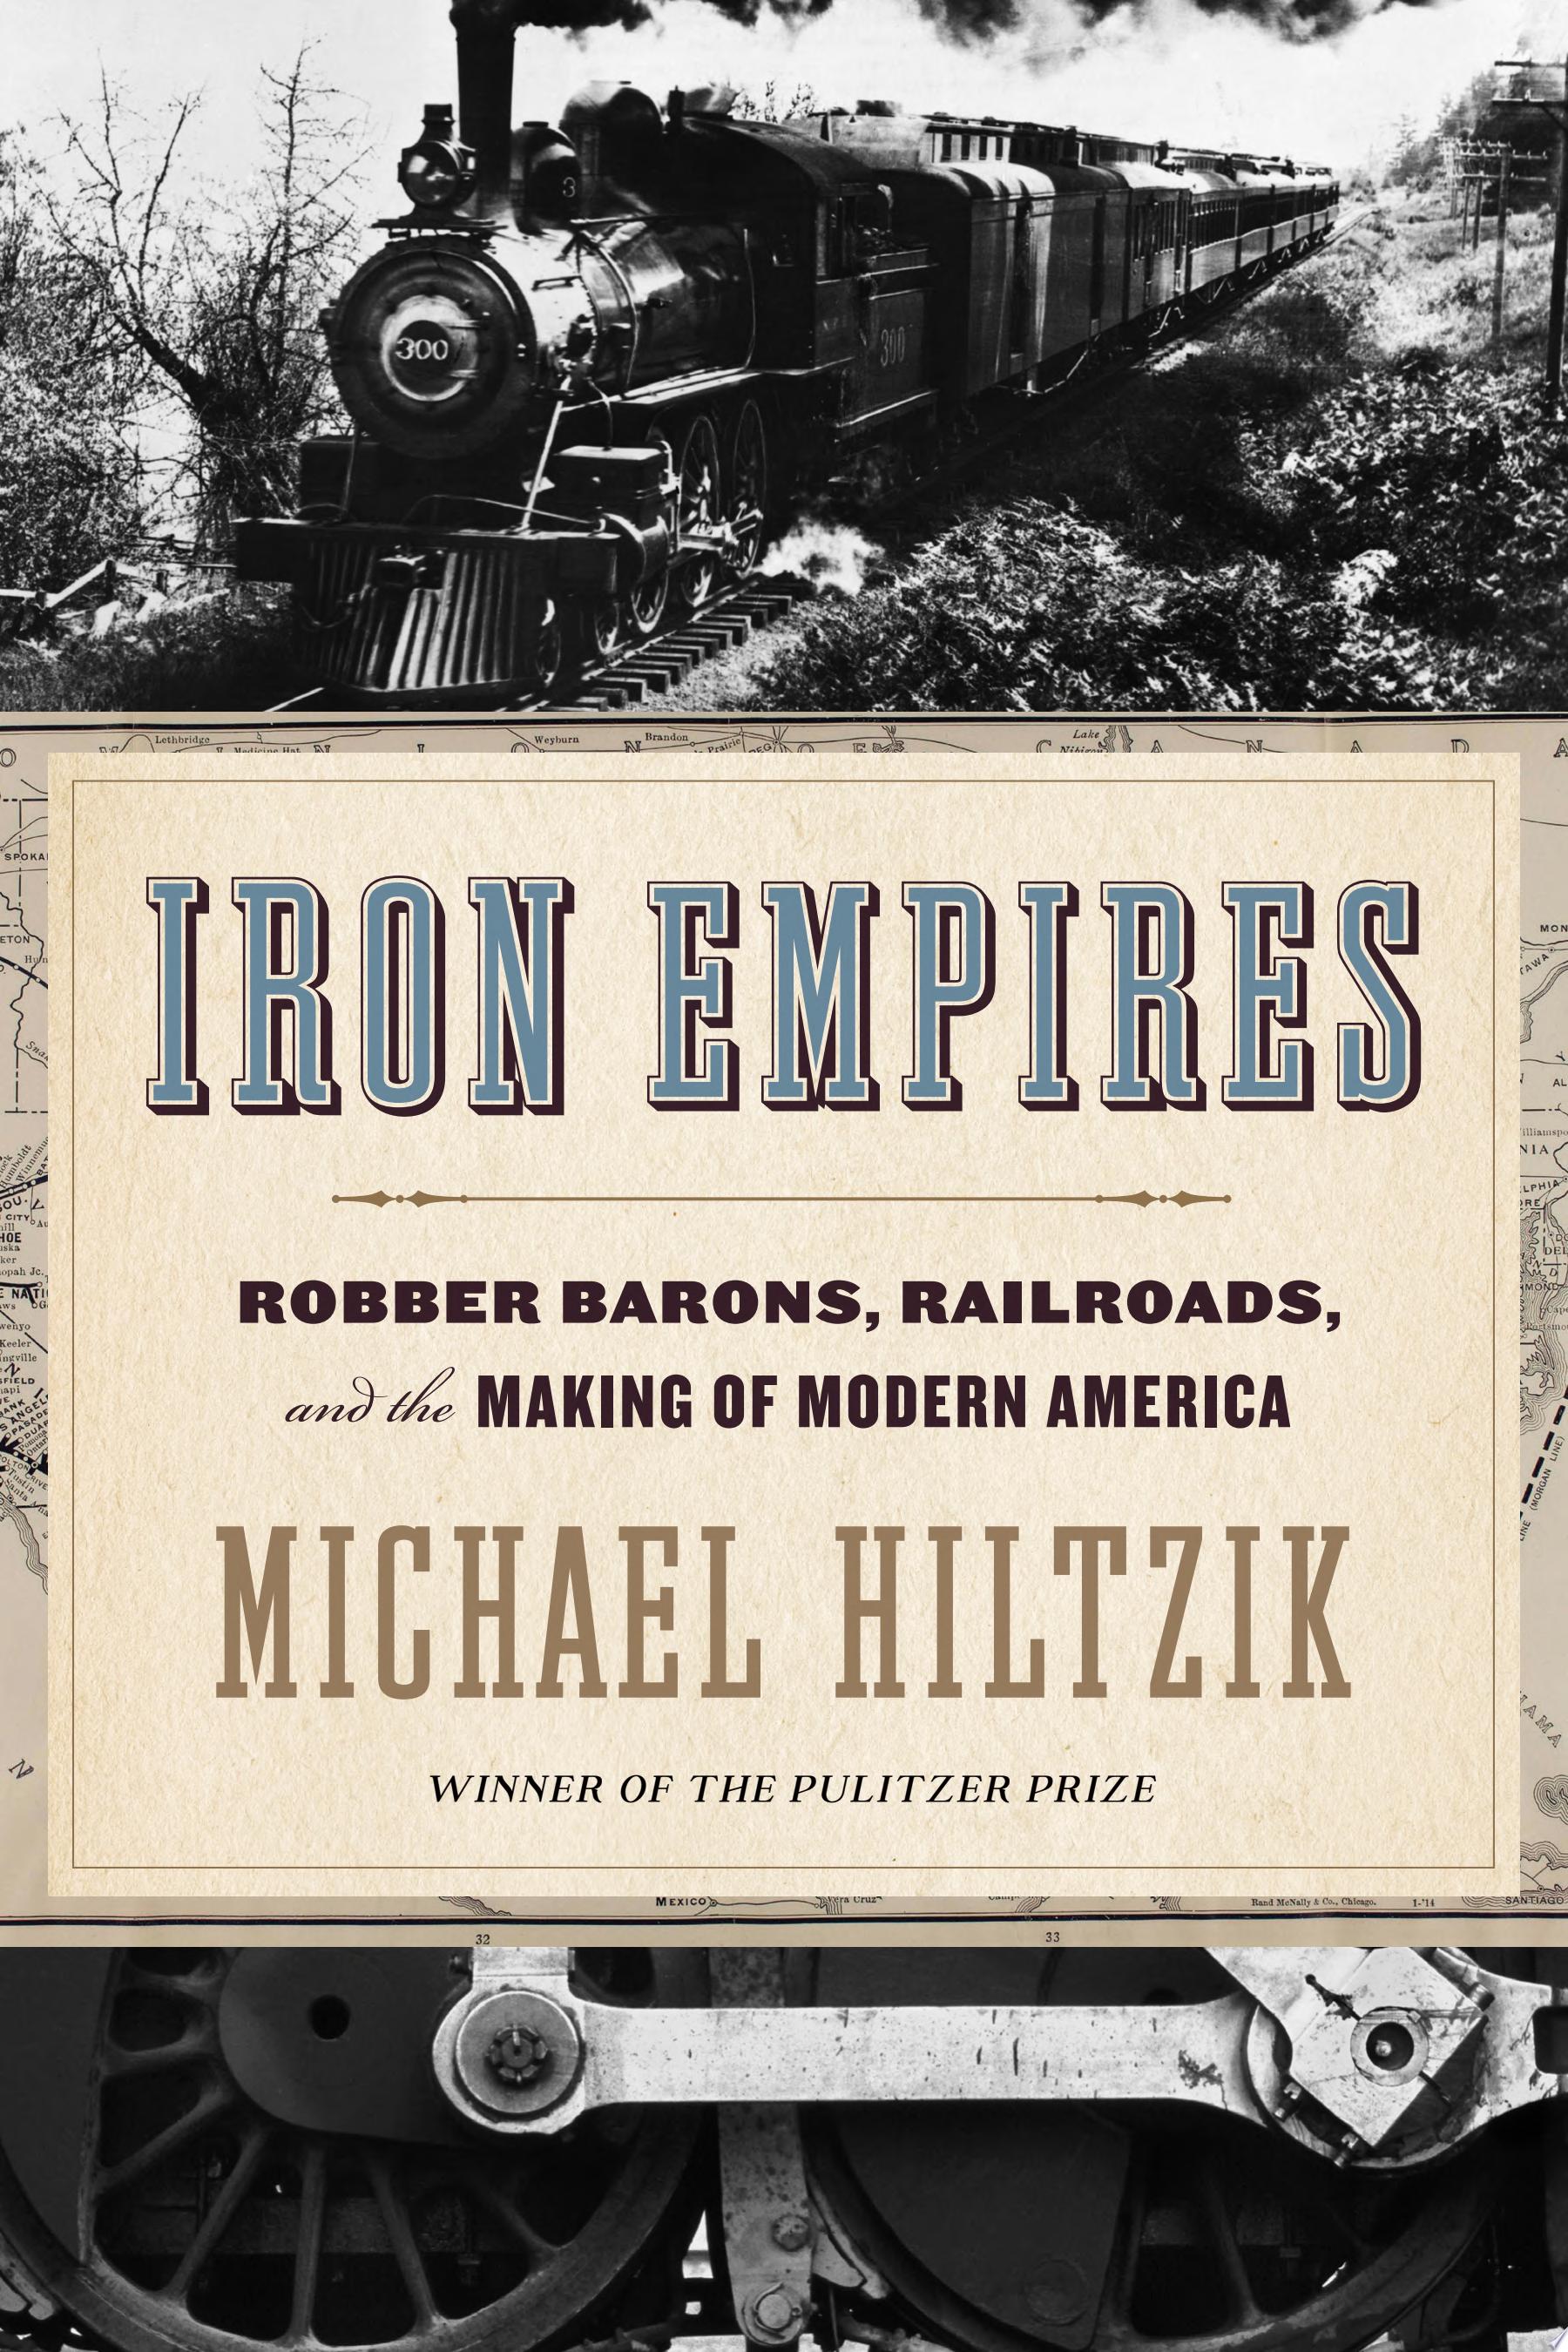 Image for "Iron Empires"